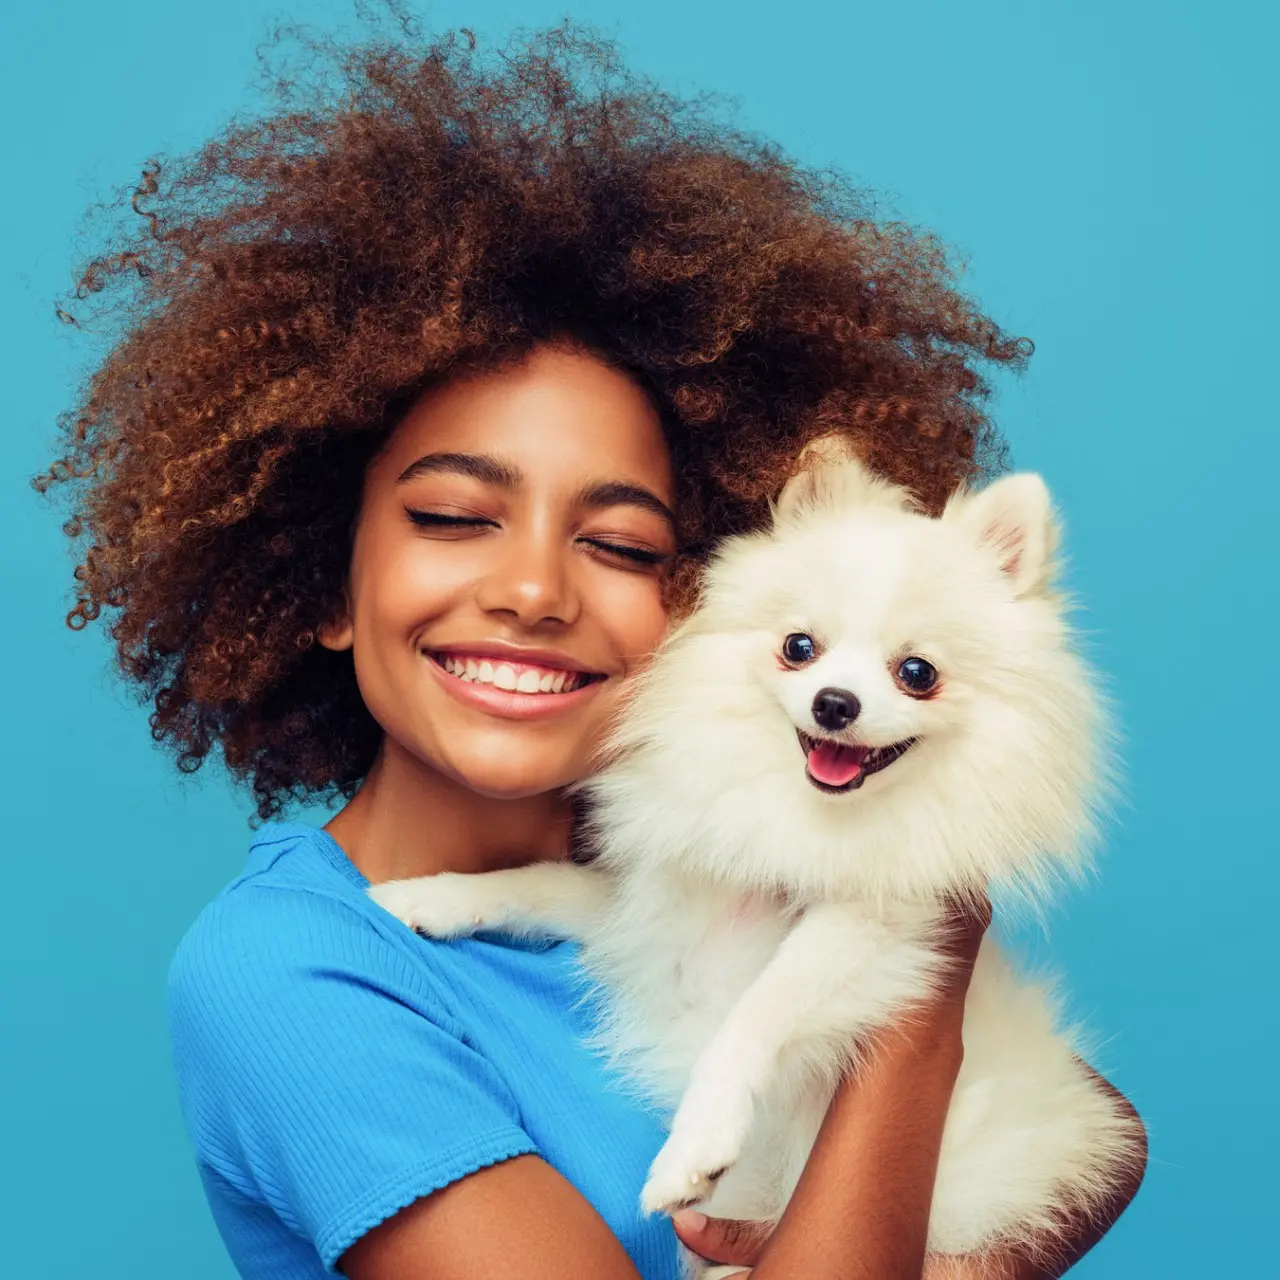 Should I get a dog? Teen girl holds furry white dog close to her while smiling